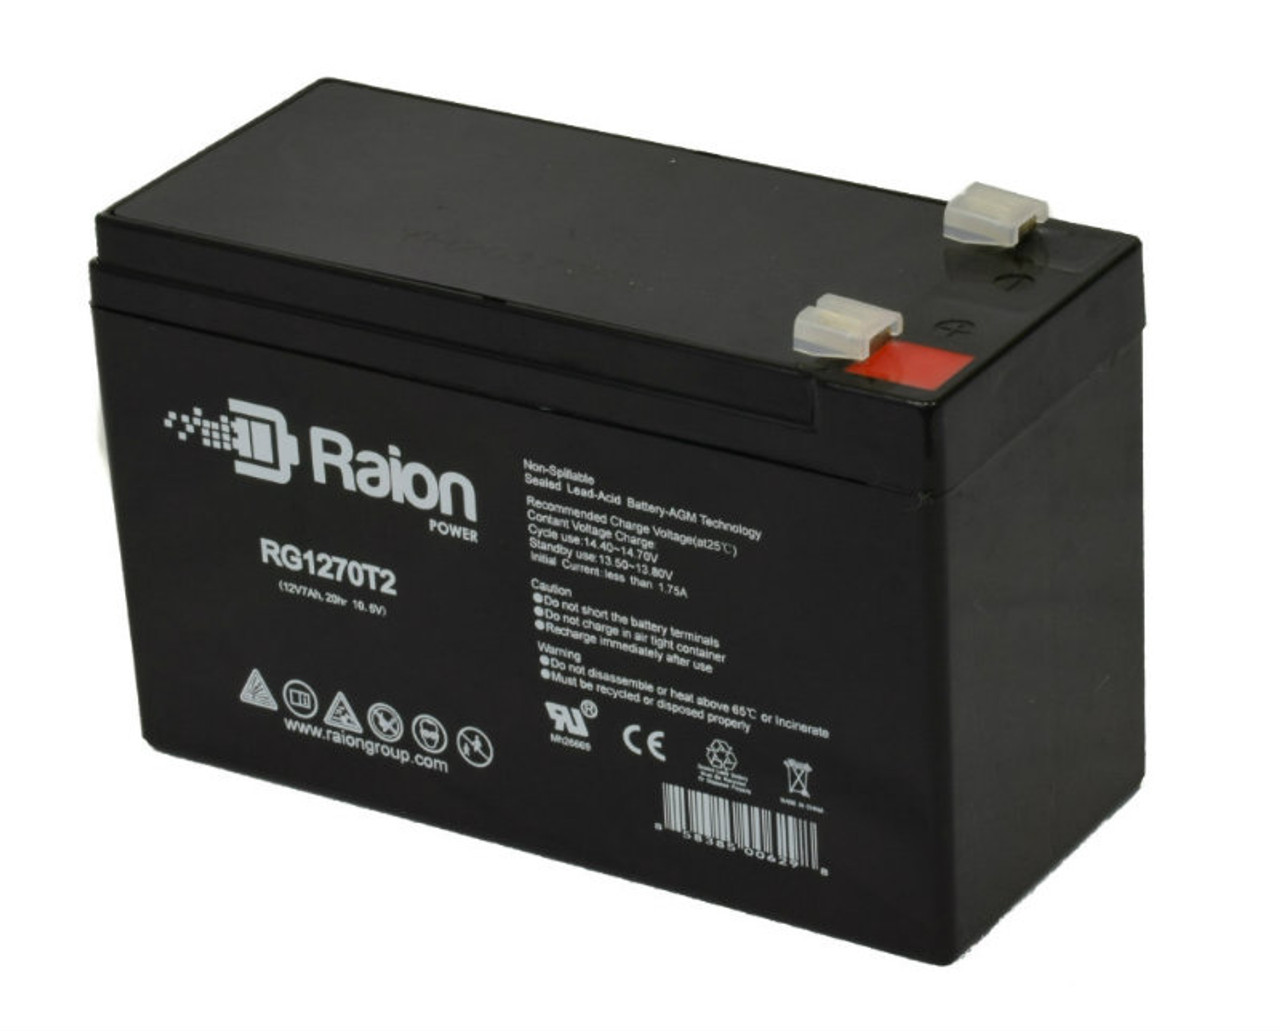 Raion Power Replacement 12V 7Ah RG1270T1 Fire Alarm Battery for Digital Security Power432 (Option 2)